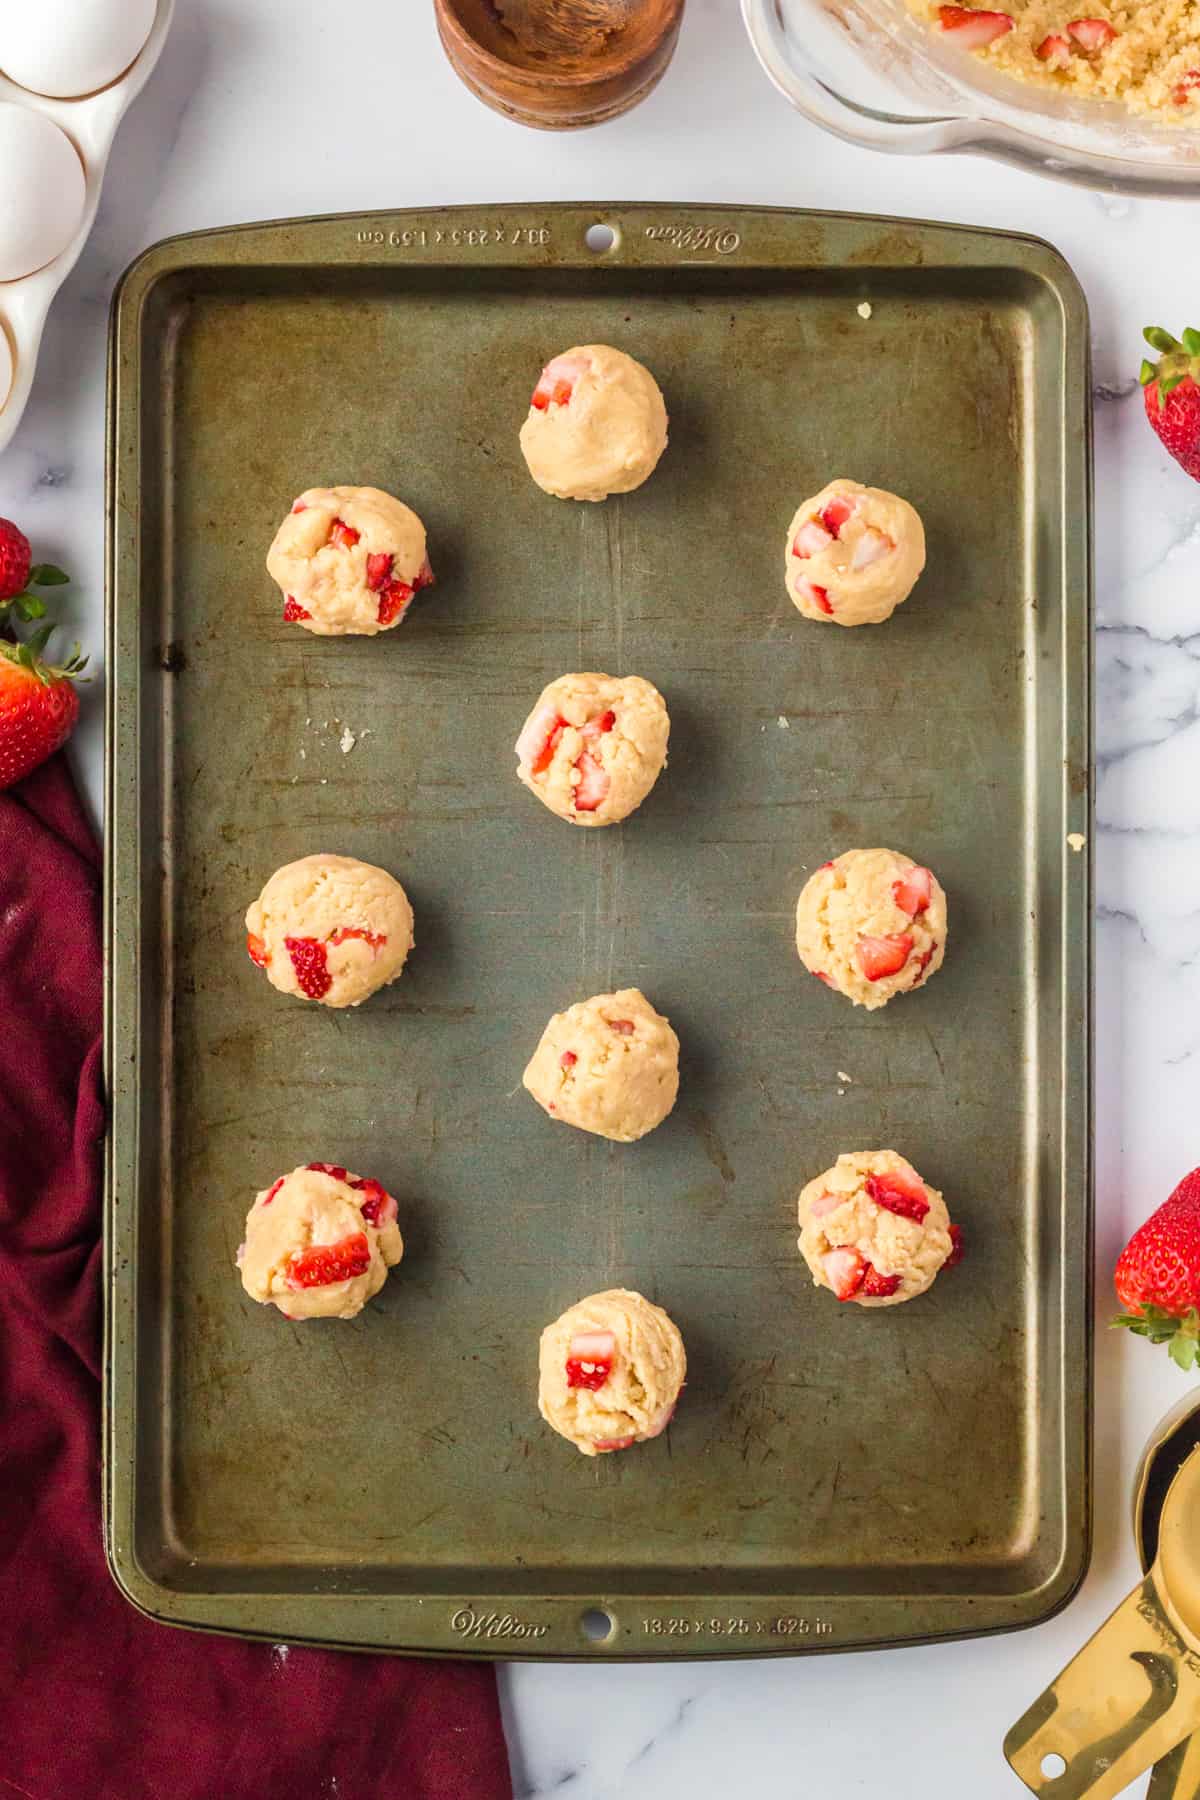 Unbaked cookies with fresh strawberries on baking sheet